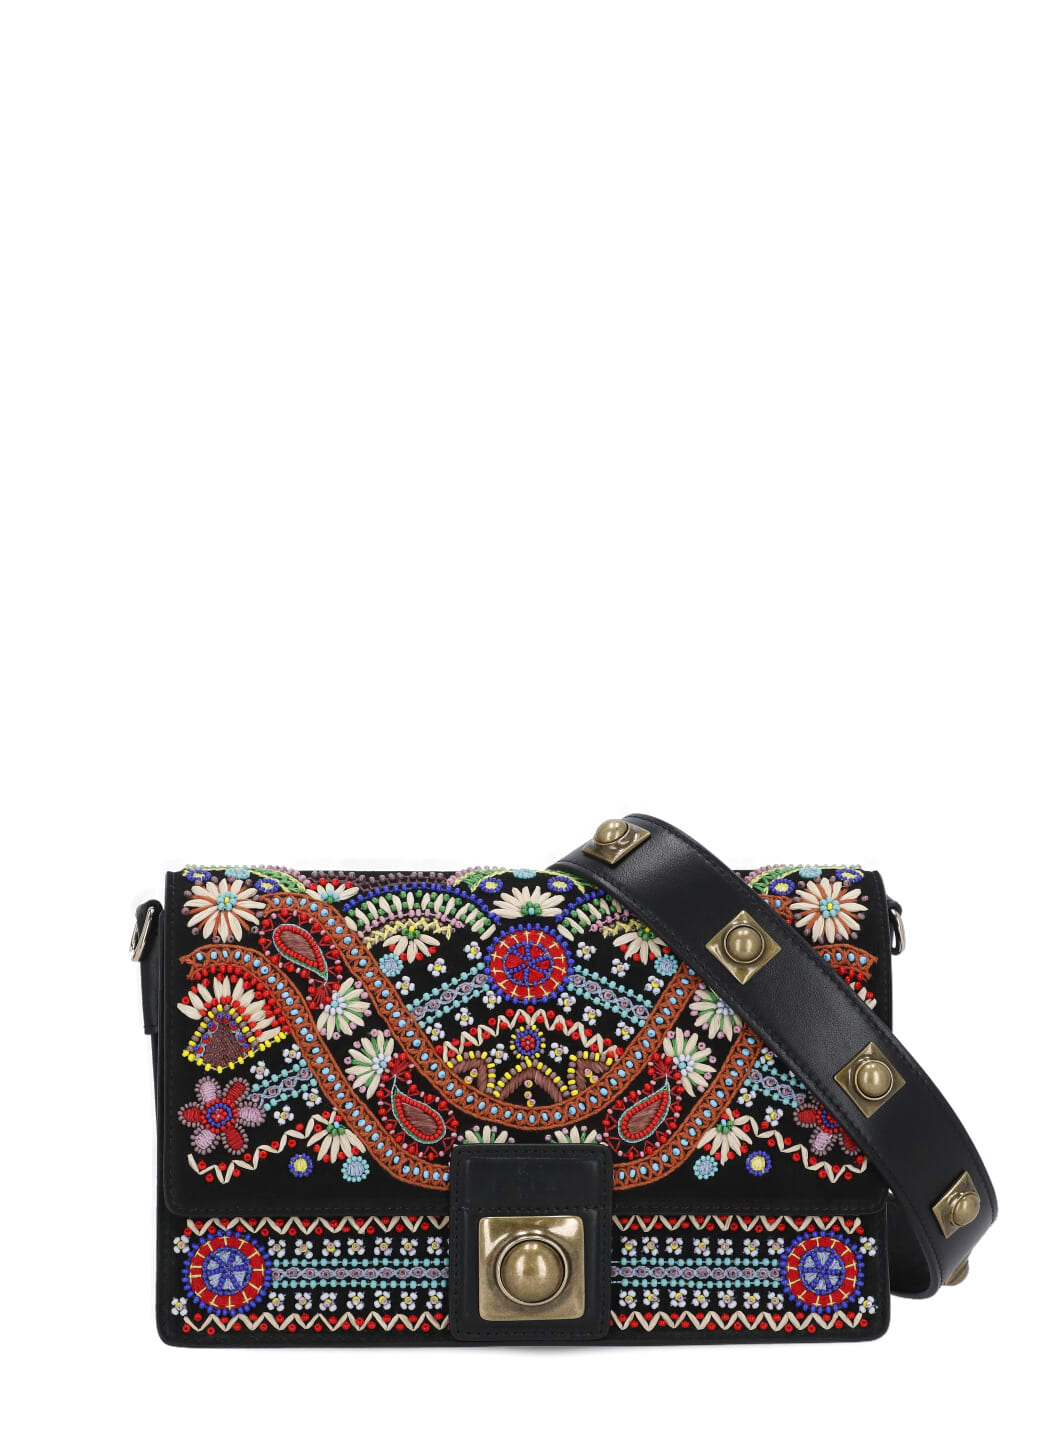 Etro Suede Leather Shoulder Bag With Embroidery